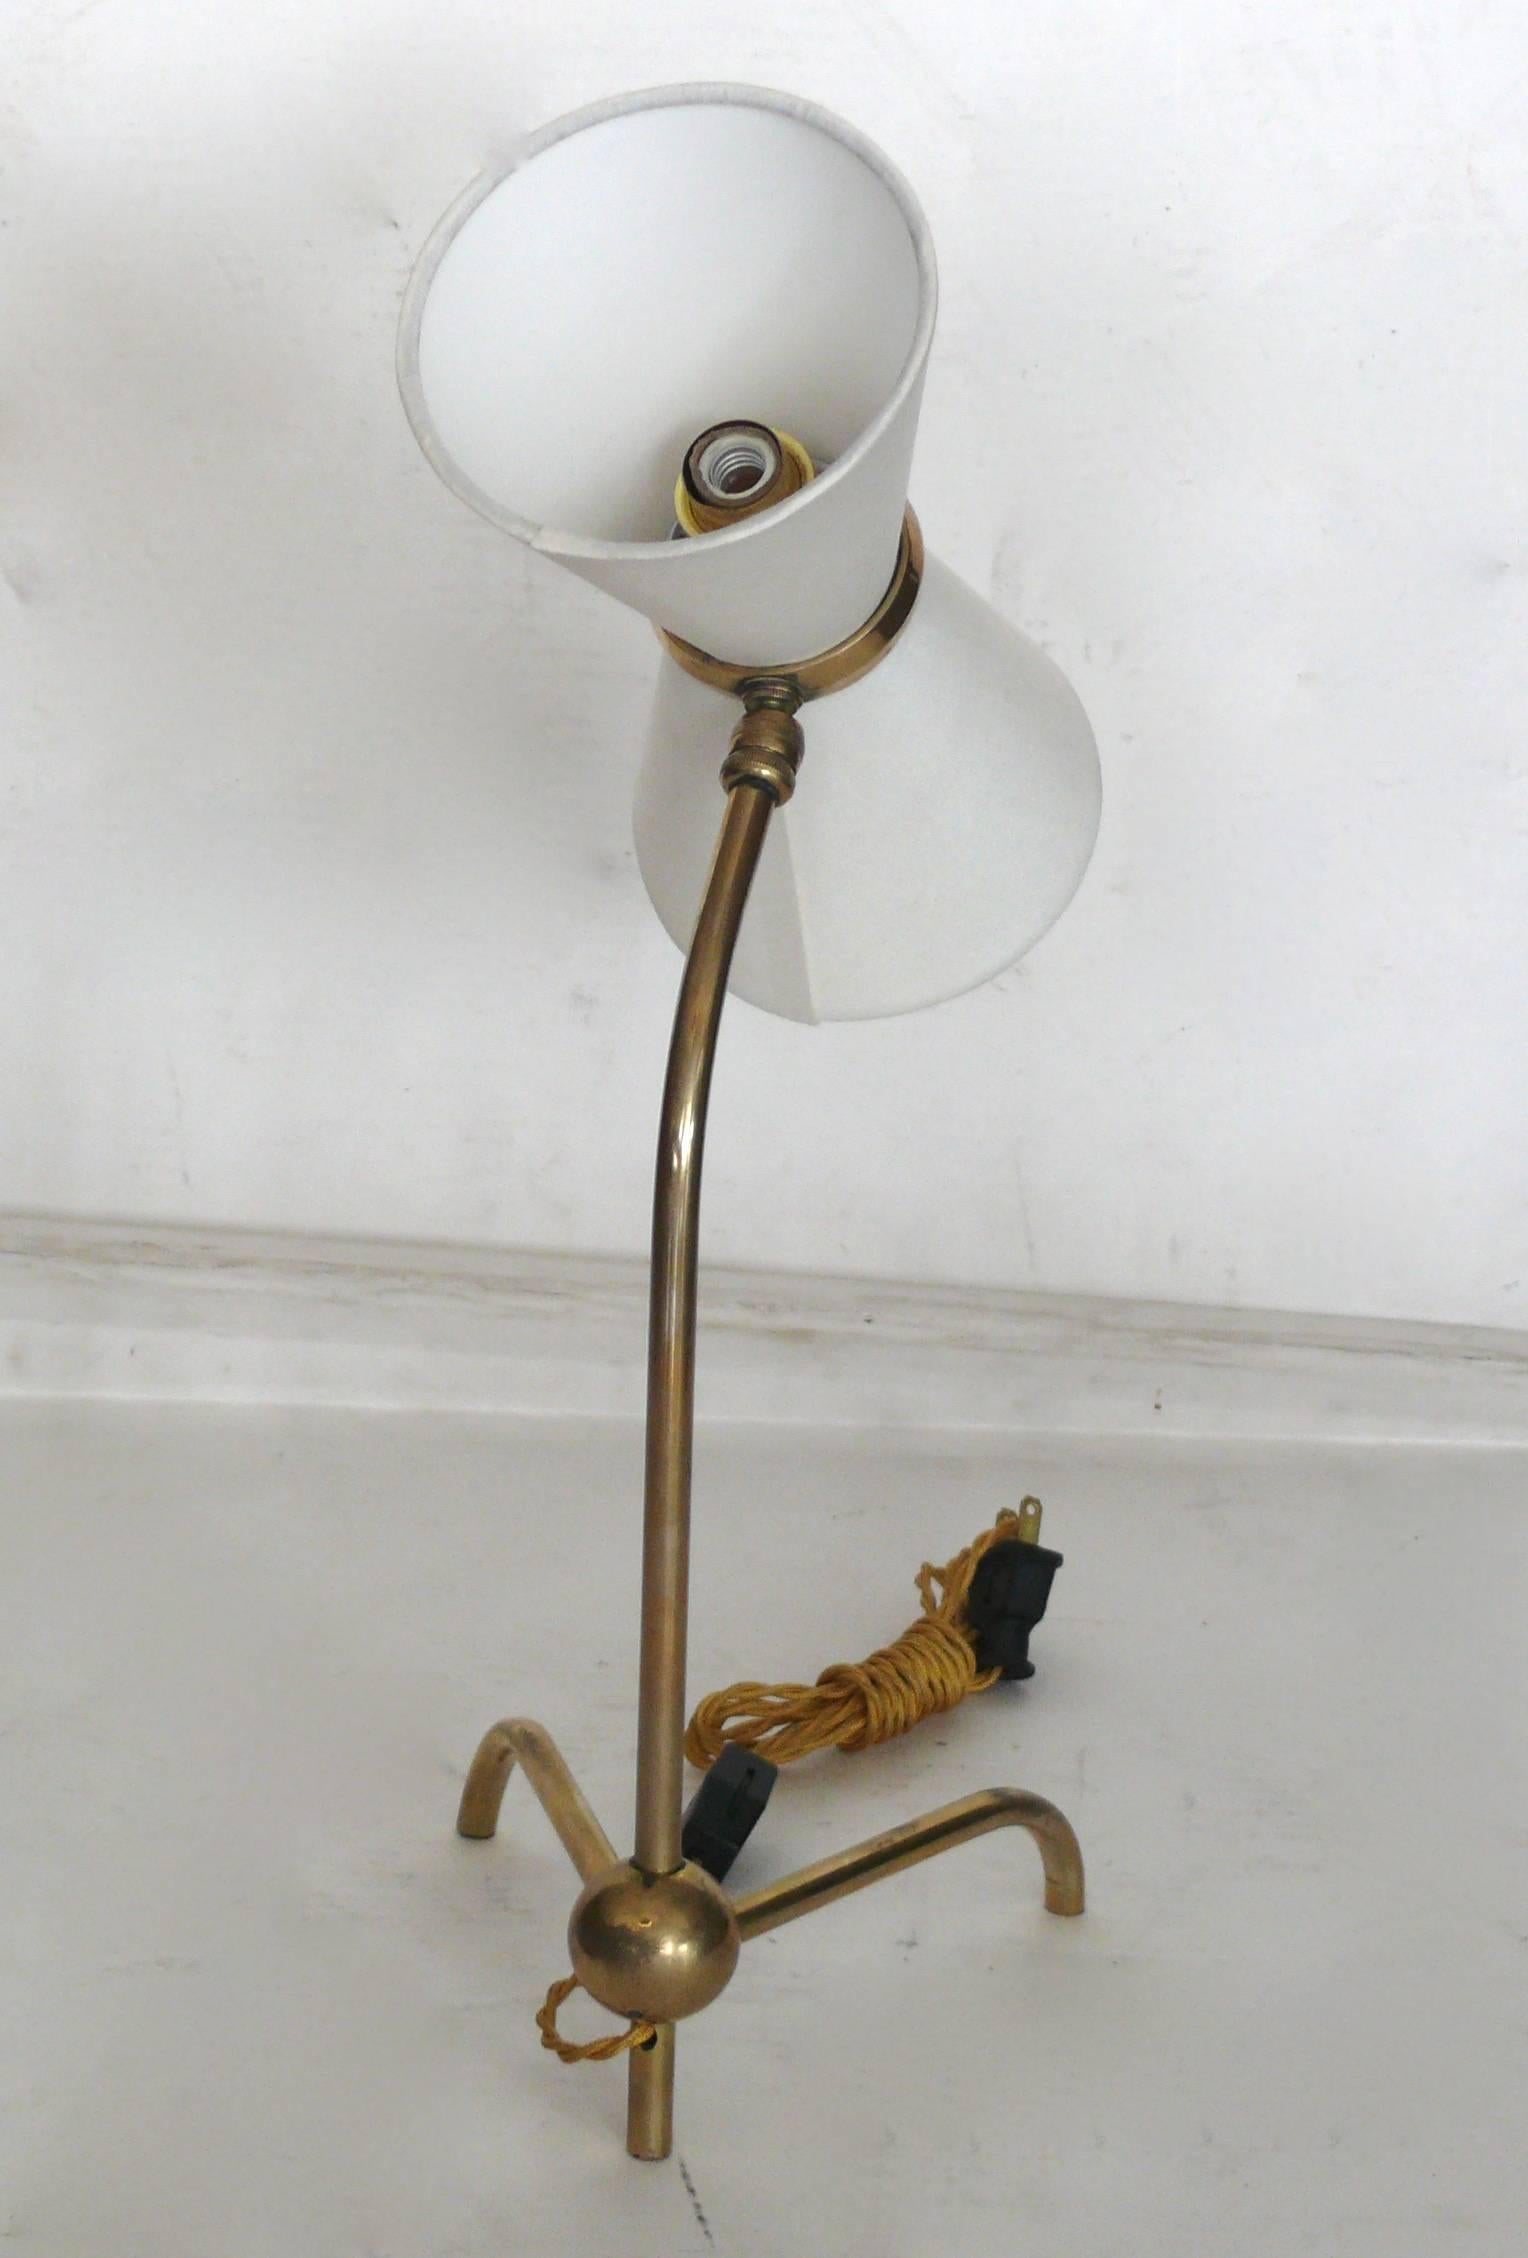 Classic French desk lamp in the style of Pierre Guariche. 
Brass tripod base and brass stem. Lamp features two sockets with up light and downlight. Newly re-wired. New silk shades.